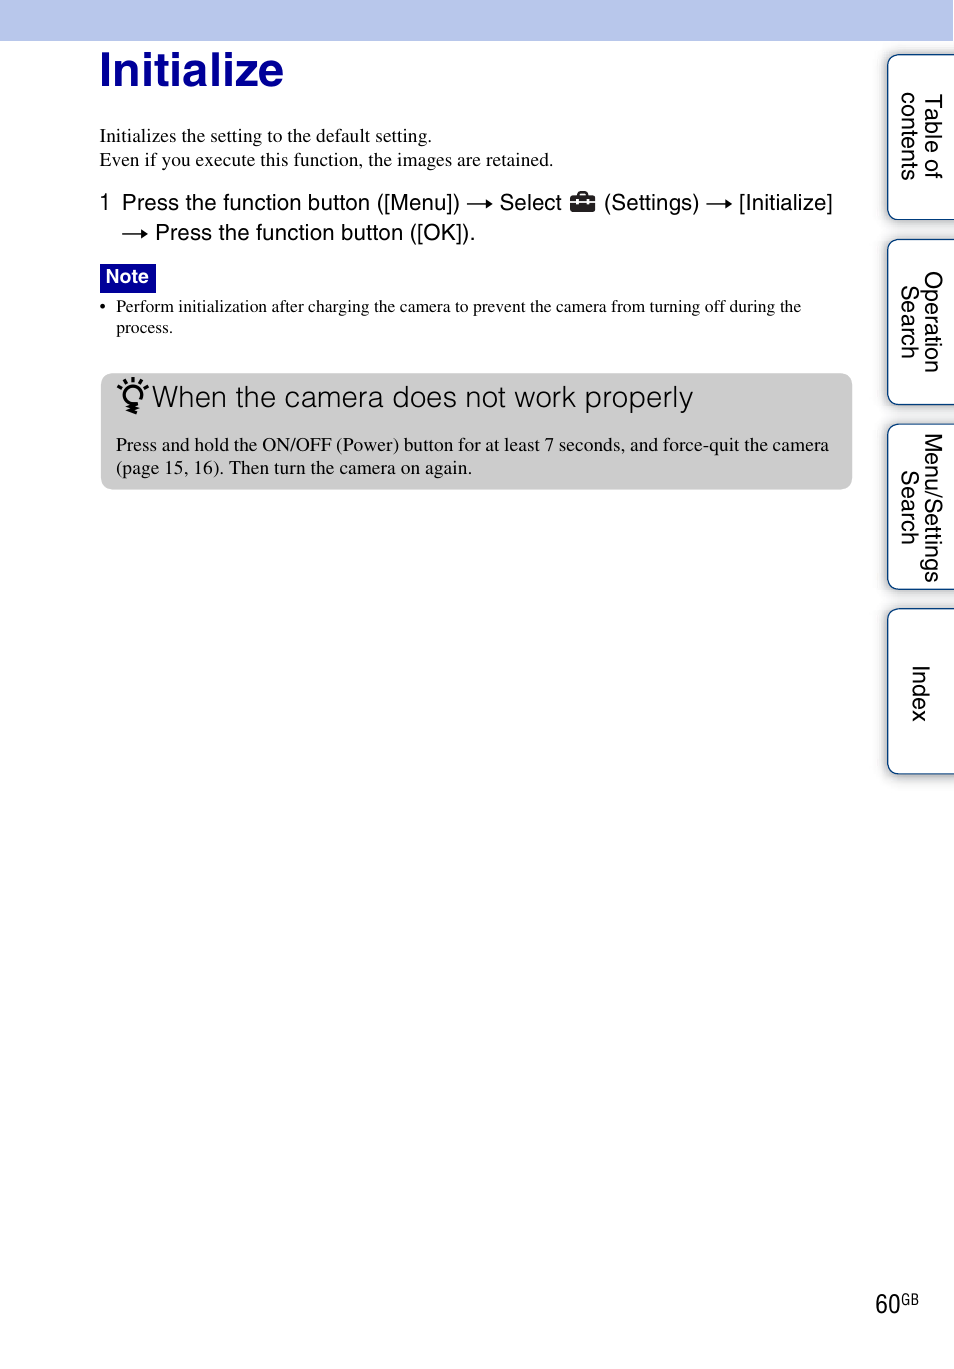 Initialize, When the camera does not work properly | Sony bloggie MHS-FS2K User Manual | Page 60 / 80